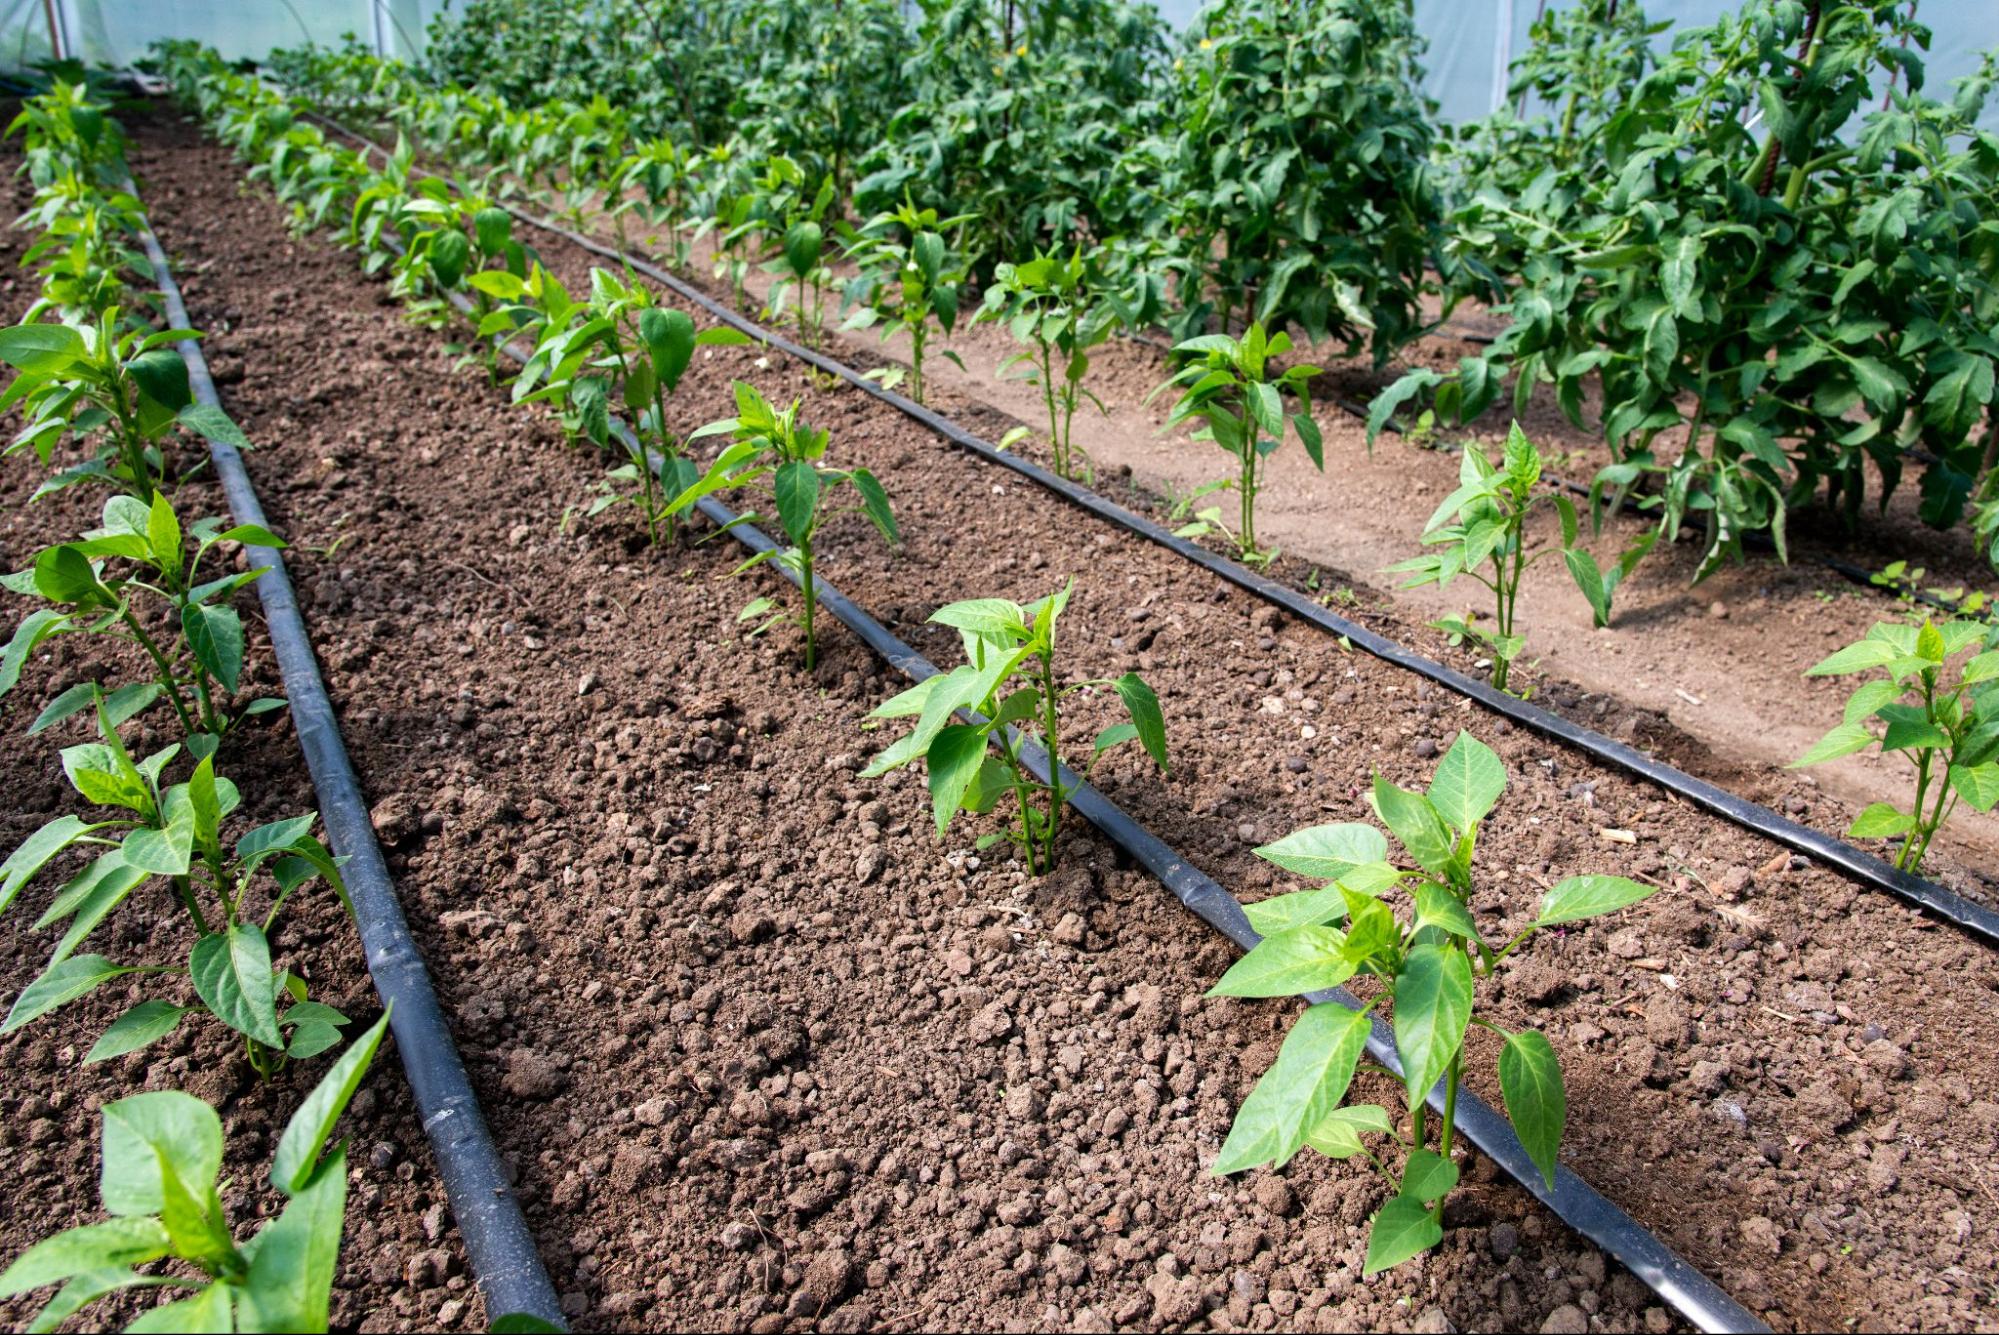 Rows of healthy young pepper plants in a greenhouse growing in soil with drip irrigation lines next to them